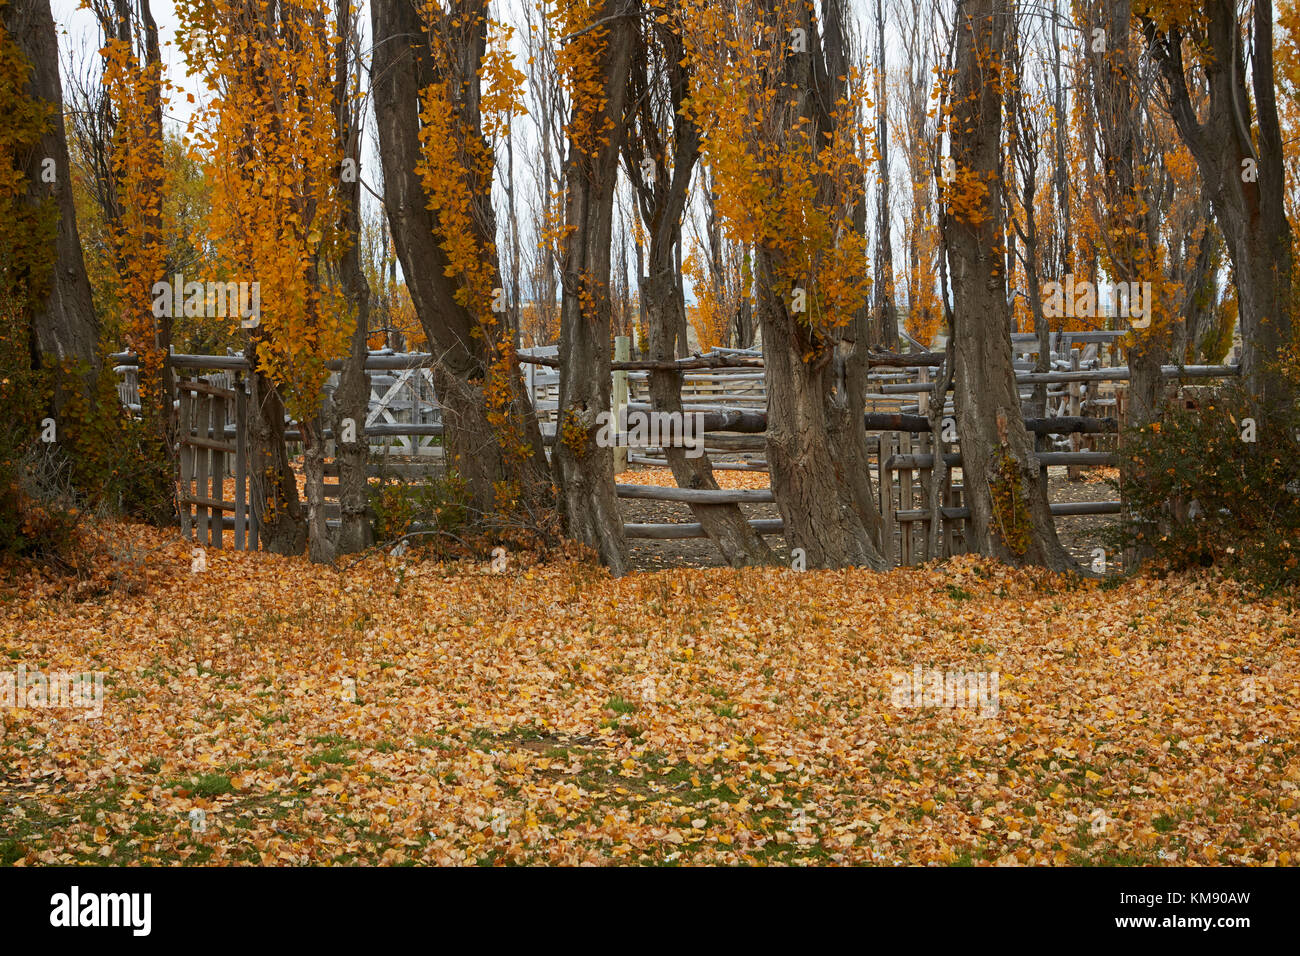 Poplar trees and stock yard by La Leona River, Patagonia, Argentina, South America Stock Photo